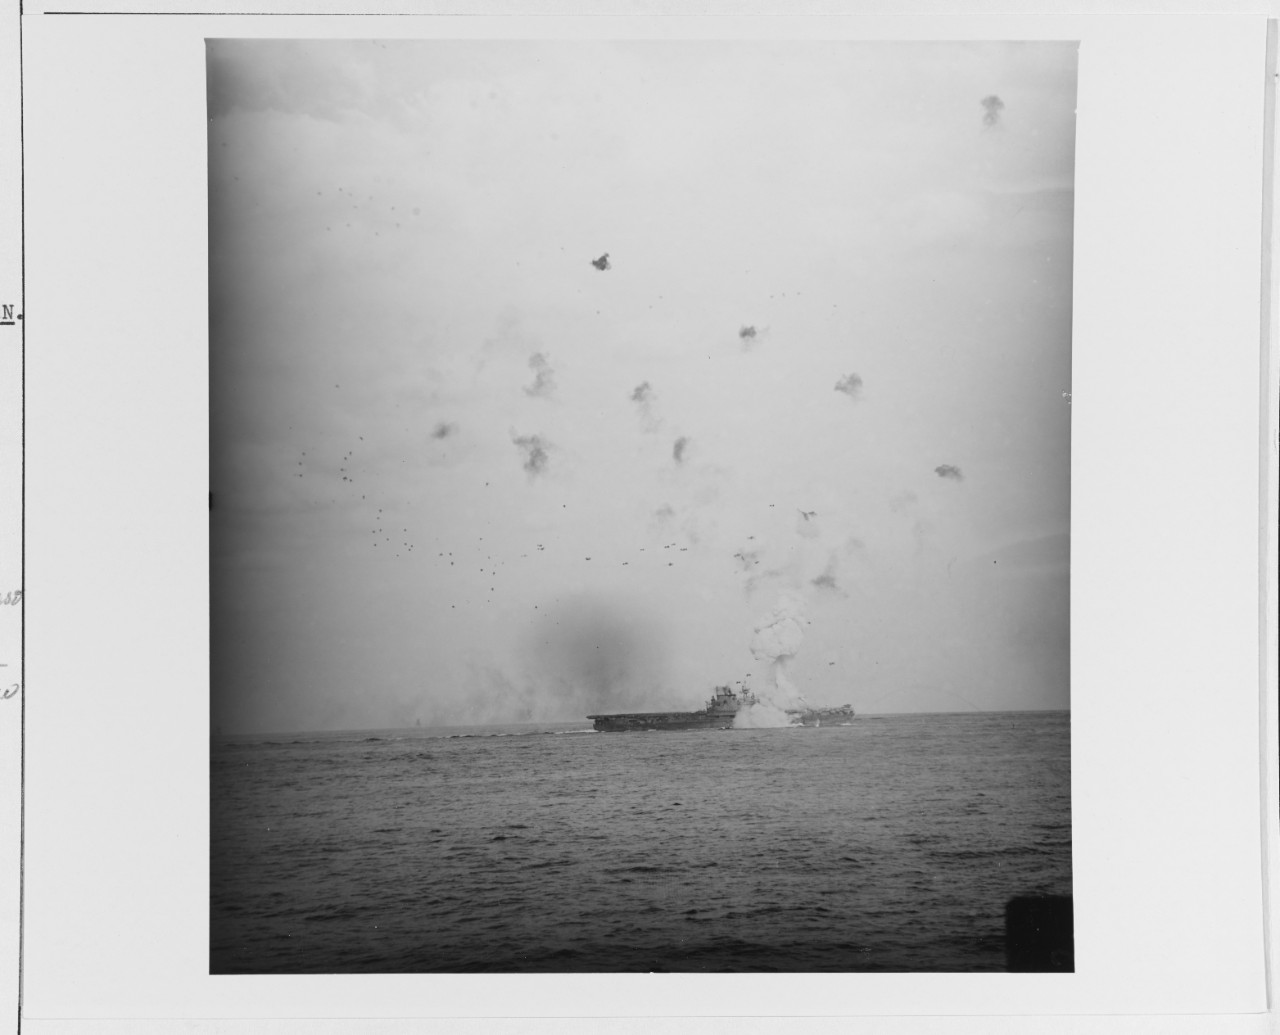 Despite the intense flak bursts over Enterprise the Zeke slams into the ship to starboard, as seen from Bataan (CVL-29), 13 May 1945. A huge column of smoke rises from the carrier, and she has way on in the midst of an emergency turn. (U.S. Navy ...